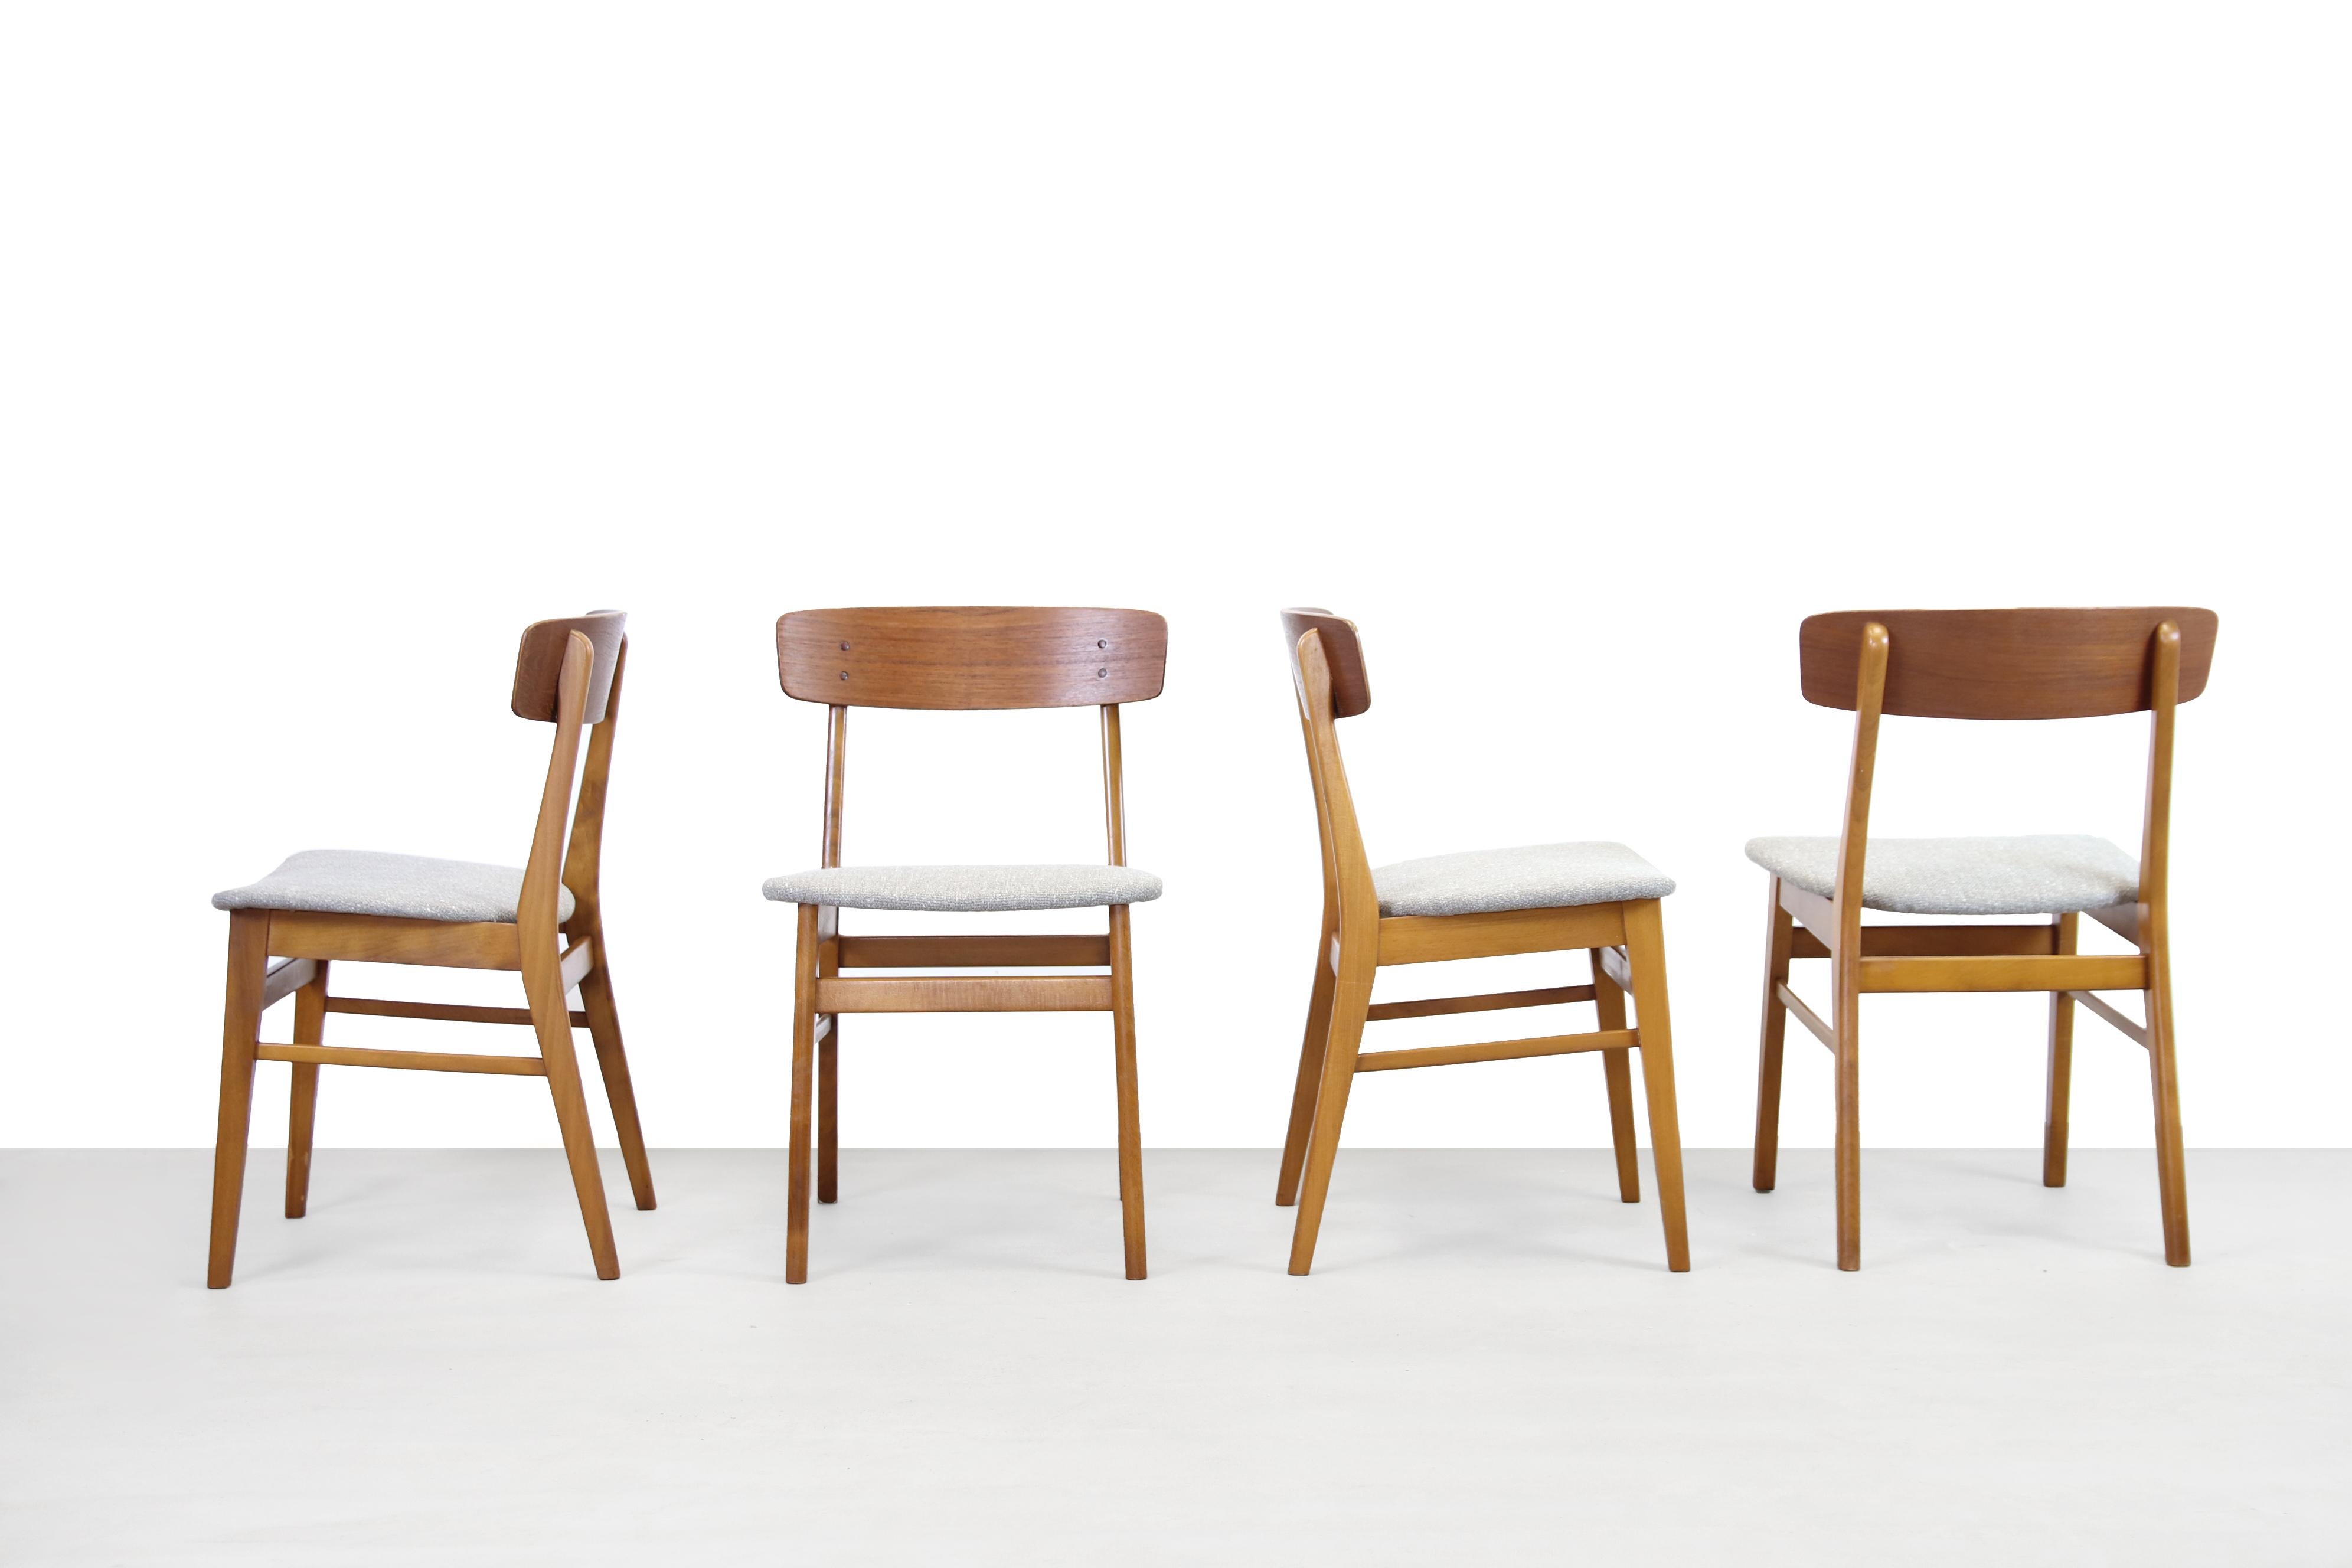 Beautiful set of 4 Farstrup dining room chairs from Denmark, 1970's. These chairs are made of solid beech wooden frame and teak plywood backrests. The seats are upholstered with beautiful coarse gray beige fabric. These Farstrup chairs are very